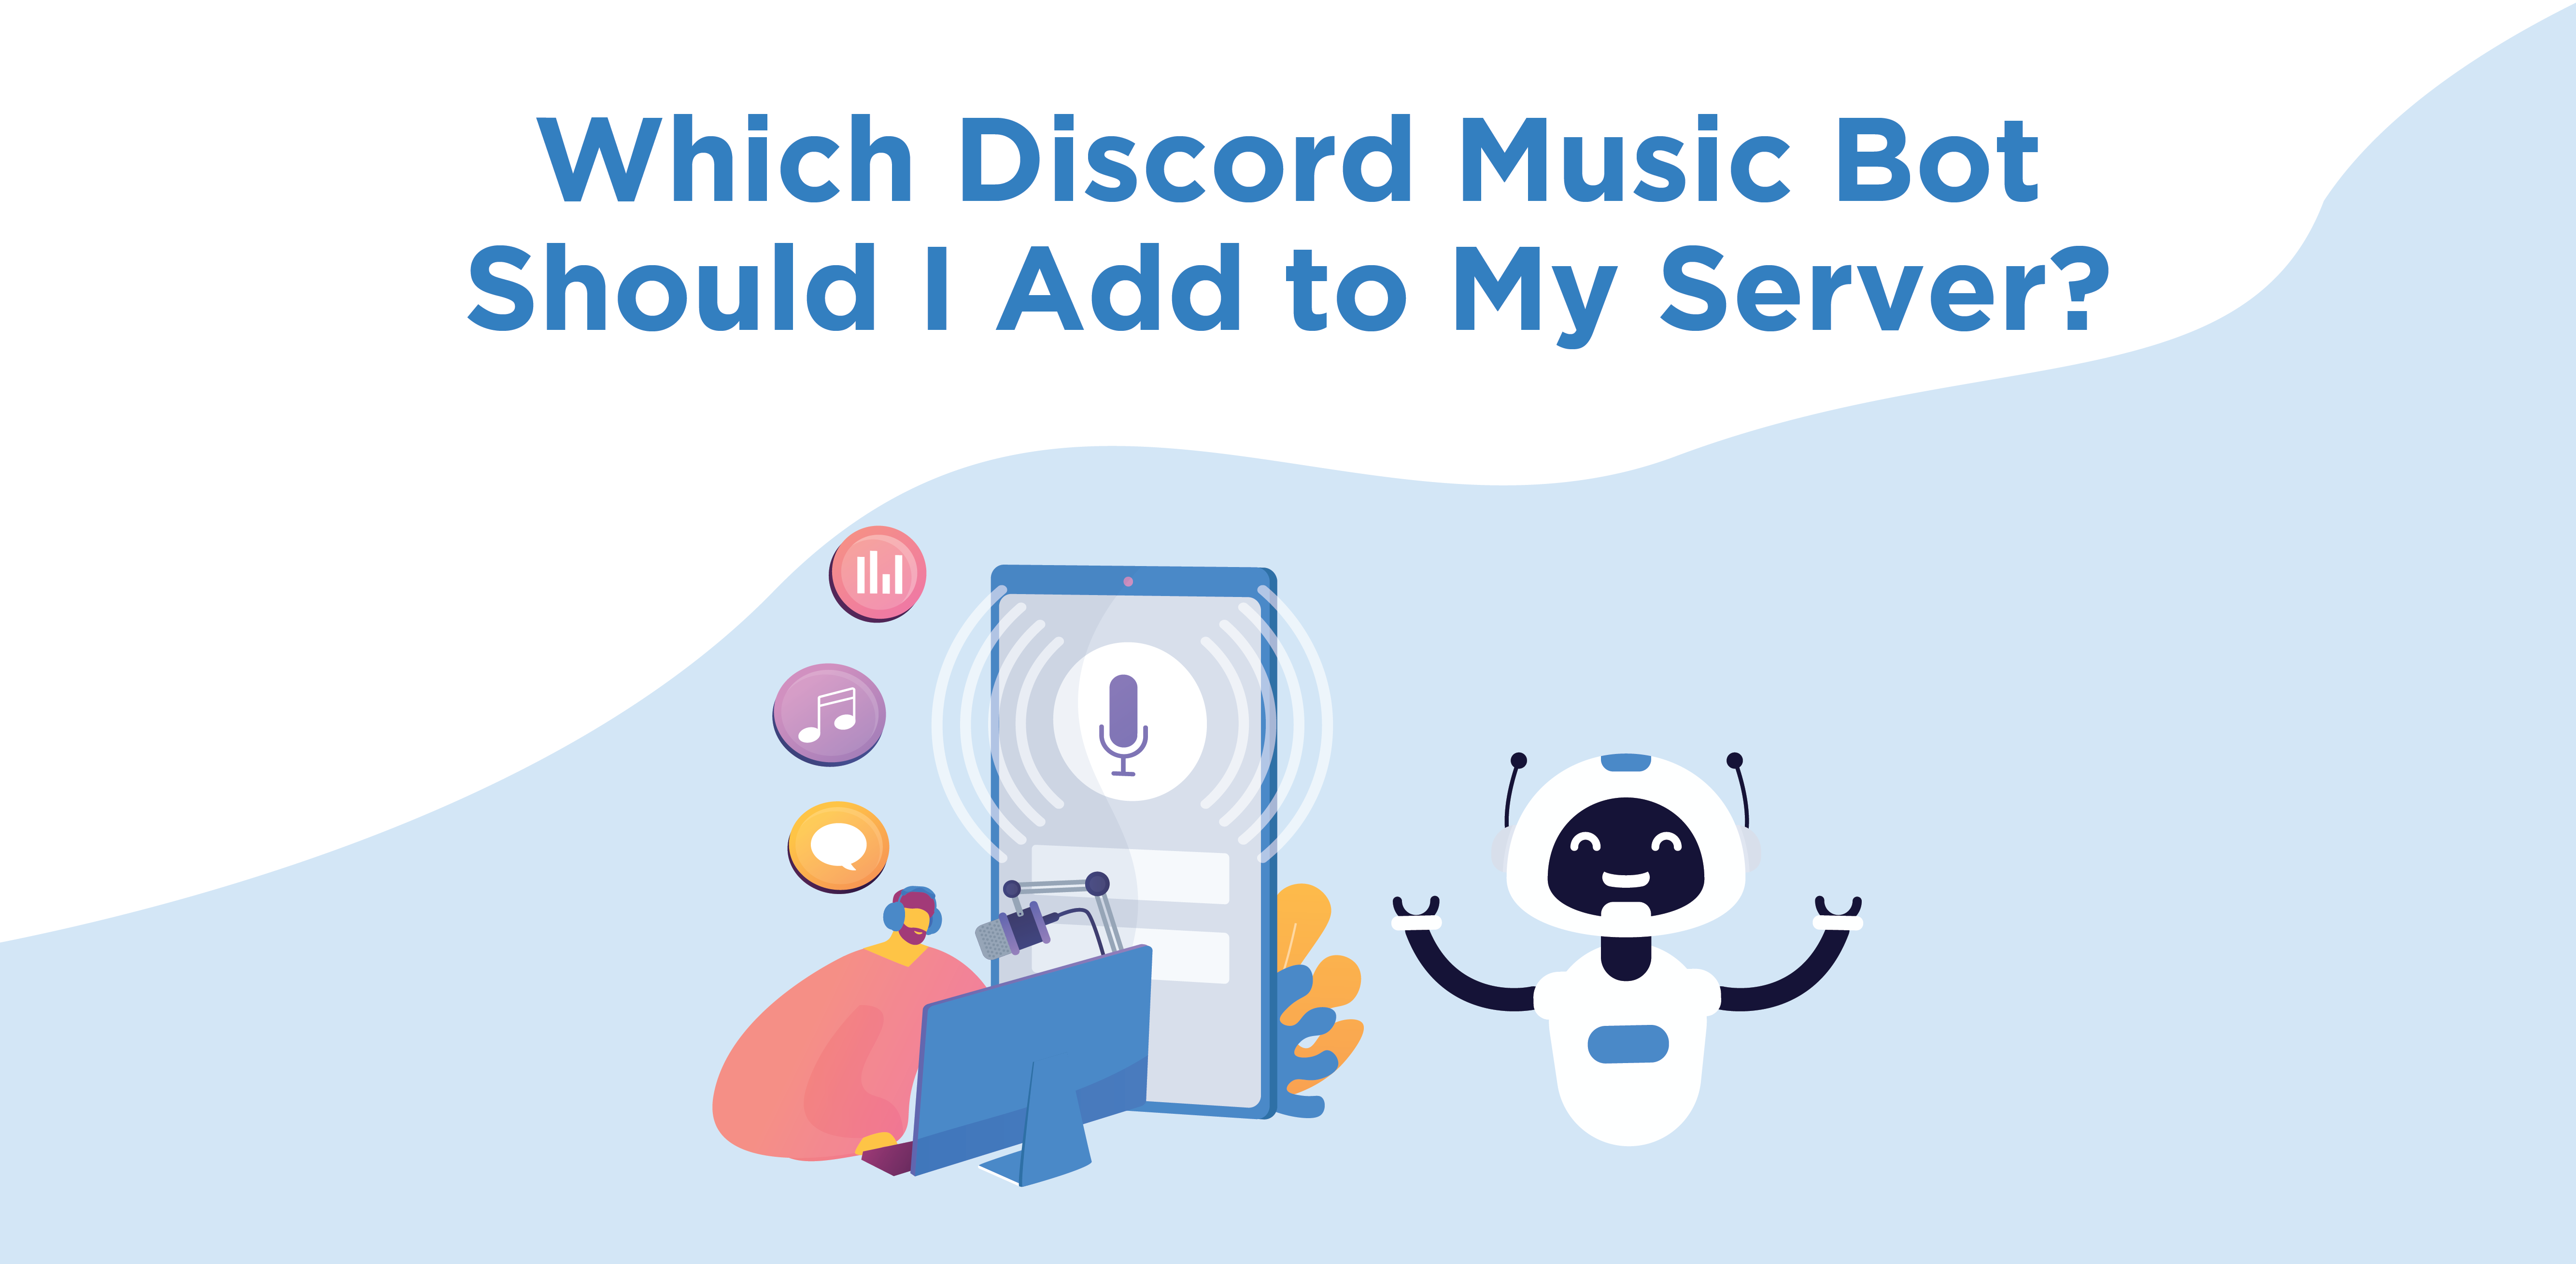 Which Discord Music Bot Should I Add to My Server?